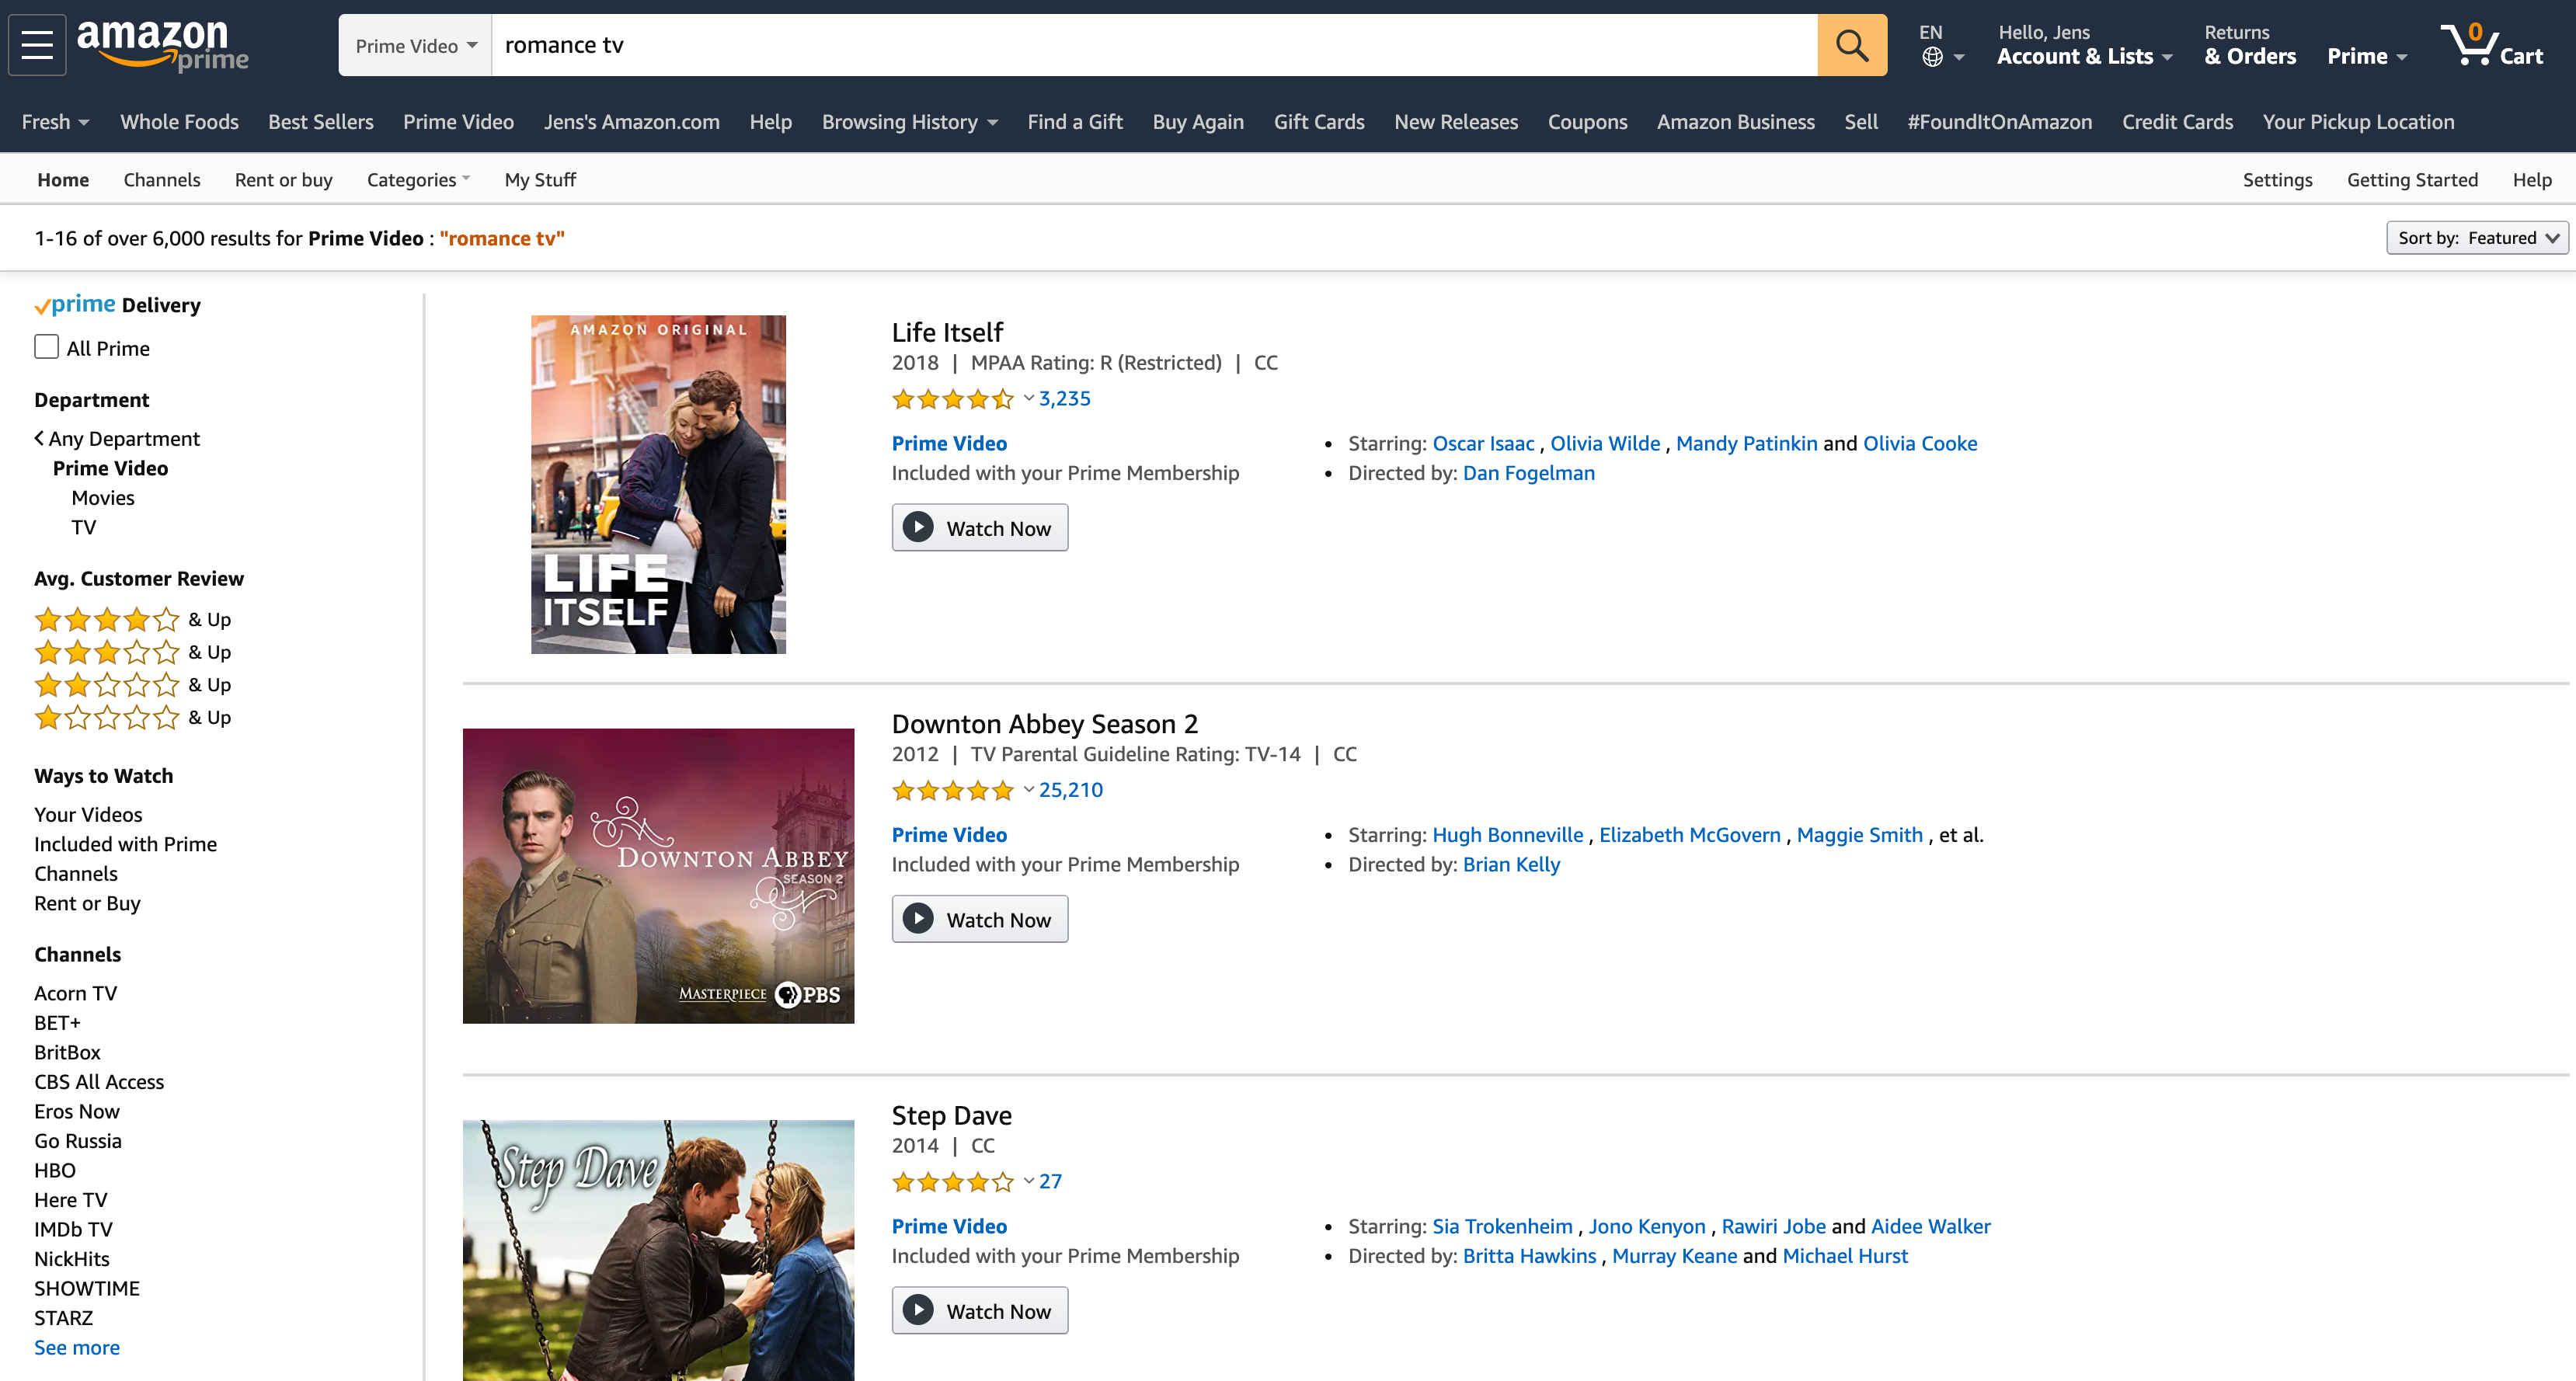 Prime Video, you could be better. Amazon Prime Video lags behind other… |  by Jens Vyff | UX Collective